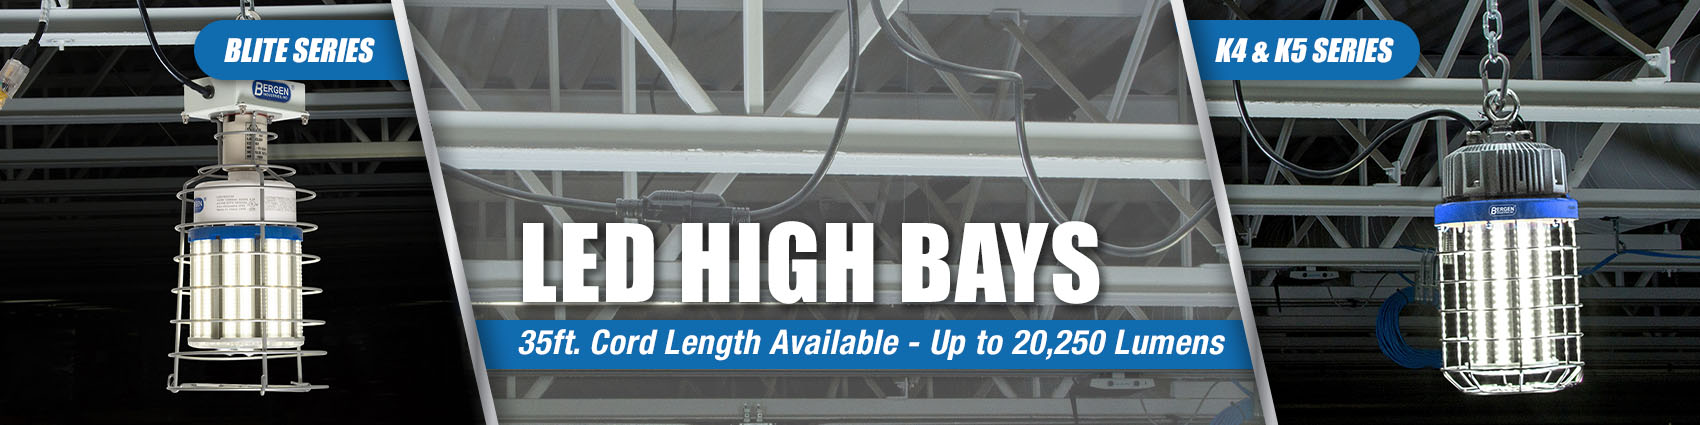 LED High Bays, 35ft Cord Length Available, Up to 20250 Lumens